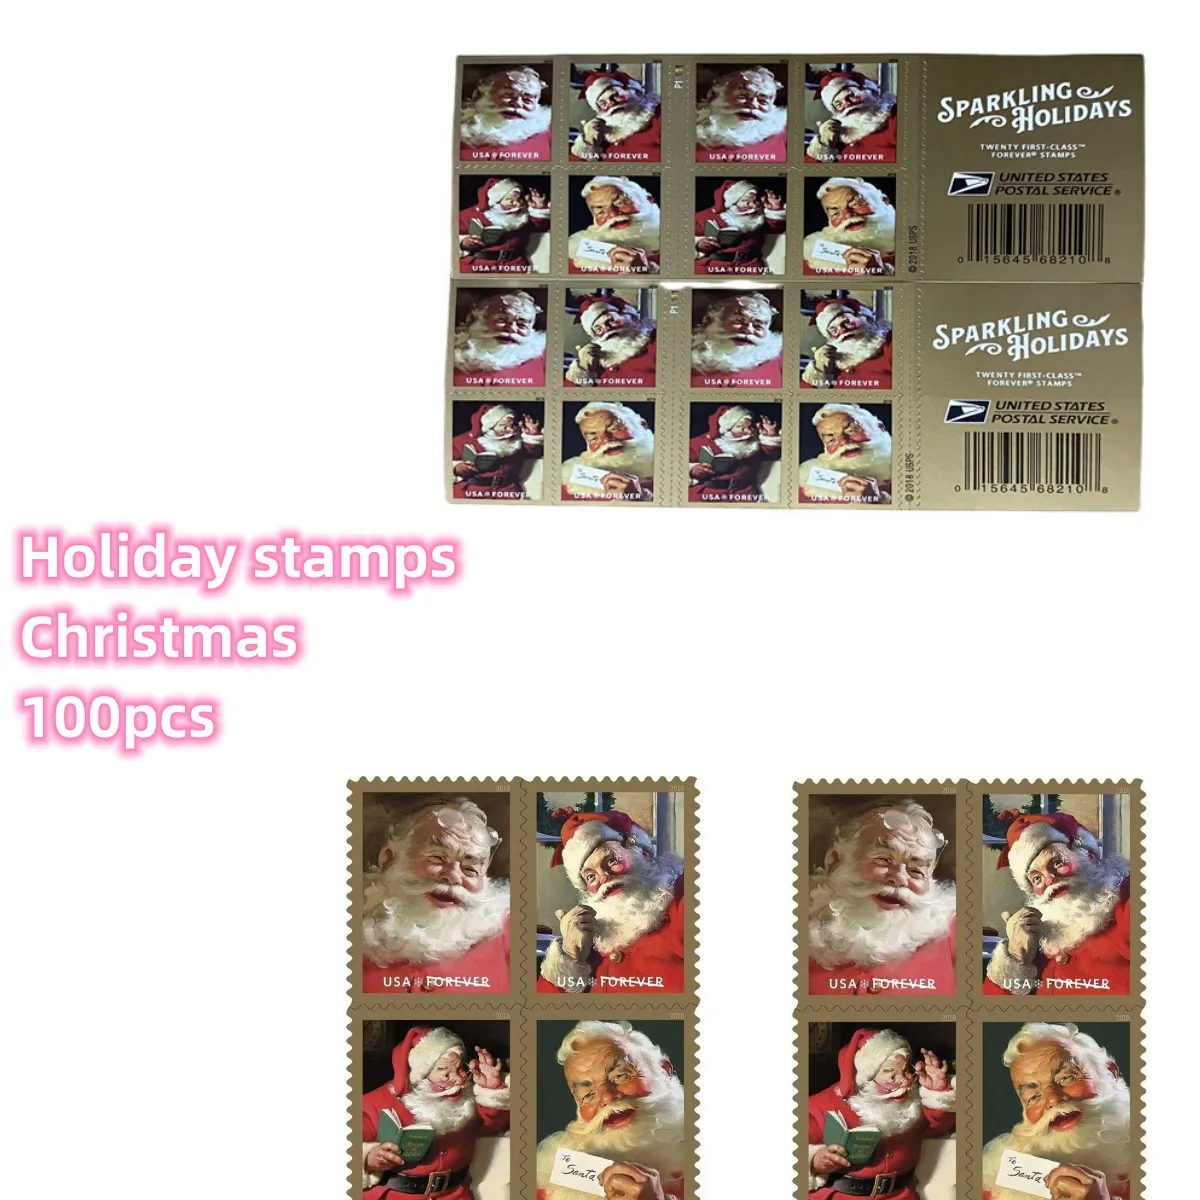 Stamp Stickers First Class For Envelopes Letters Postcard Cards Office Mail Supplies Cards Invitations Wedding